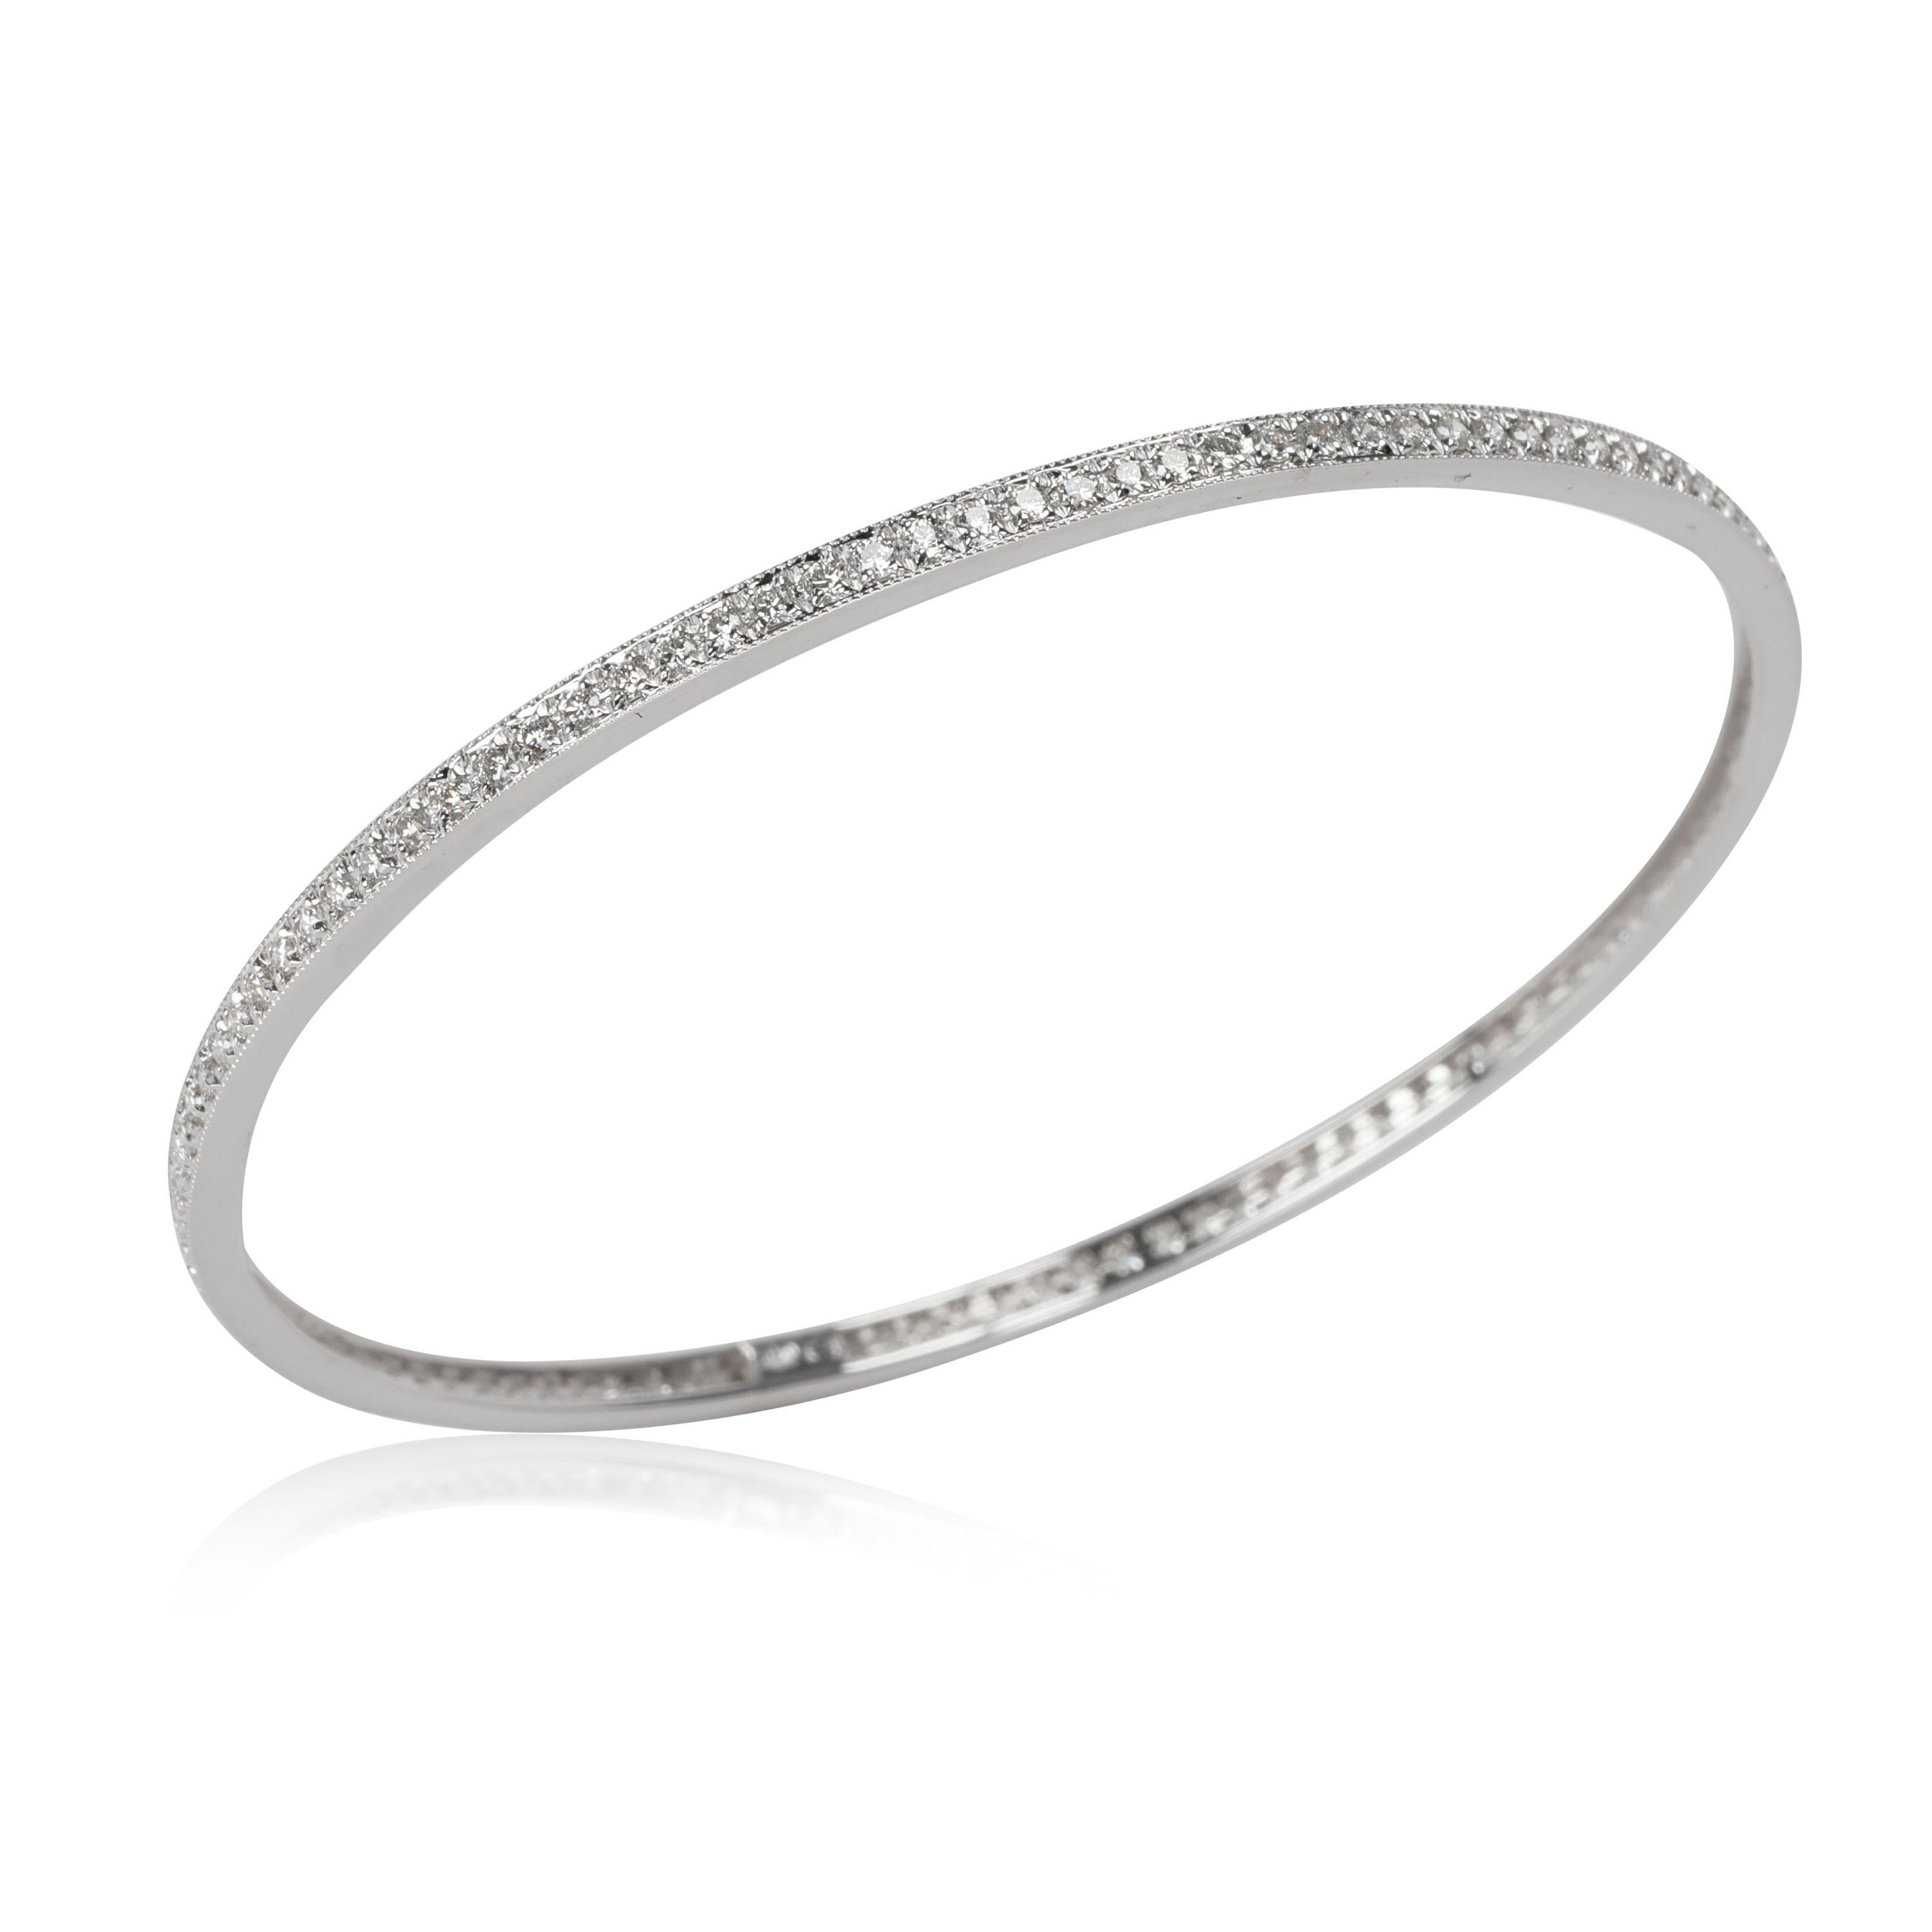 Diamond Slip On Bangle in 18k White Gold 1.75 CTW

PRIMARY DETAILS
SKU: 117275
Listing Title: Diamond Slip On Bangle in 18k White Gold 1.75 CTW
Condition Description: Retails for 2995 USD. In excellent condition and recently polished. Fits a 7.5